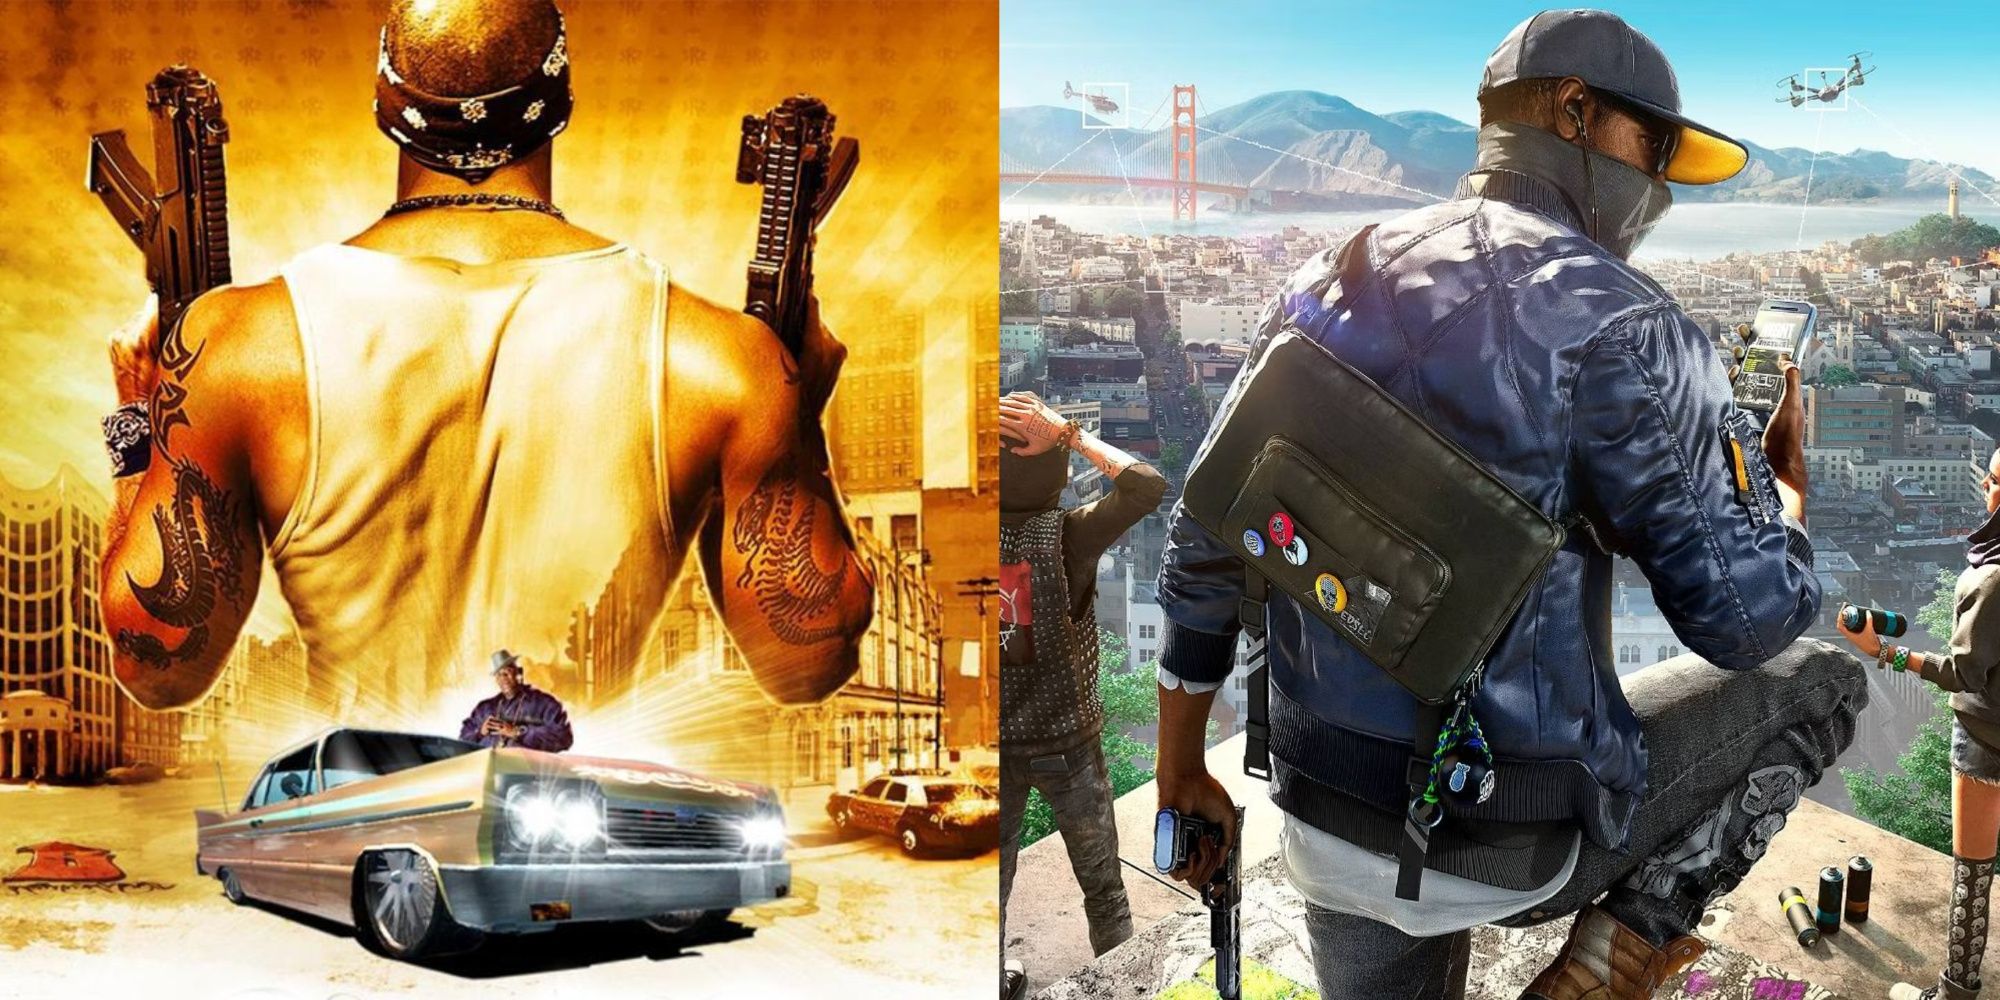 Cover art for Saints Row 2 and Watch Dogs 2